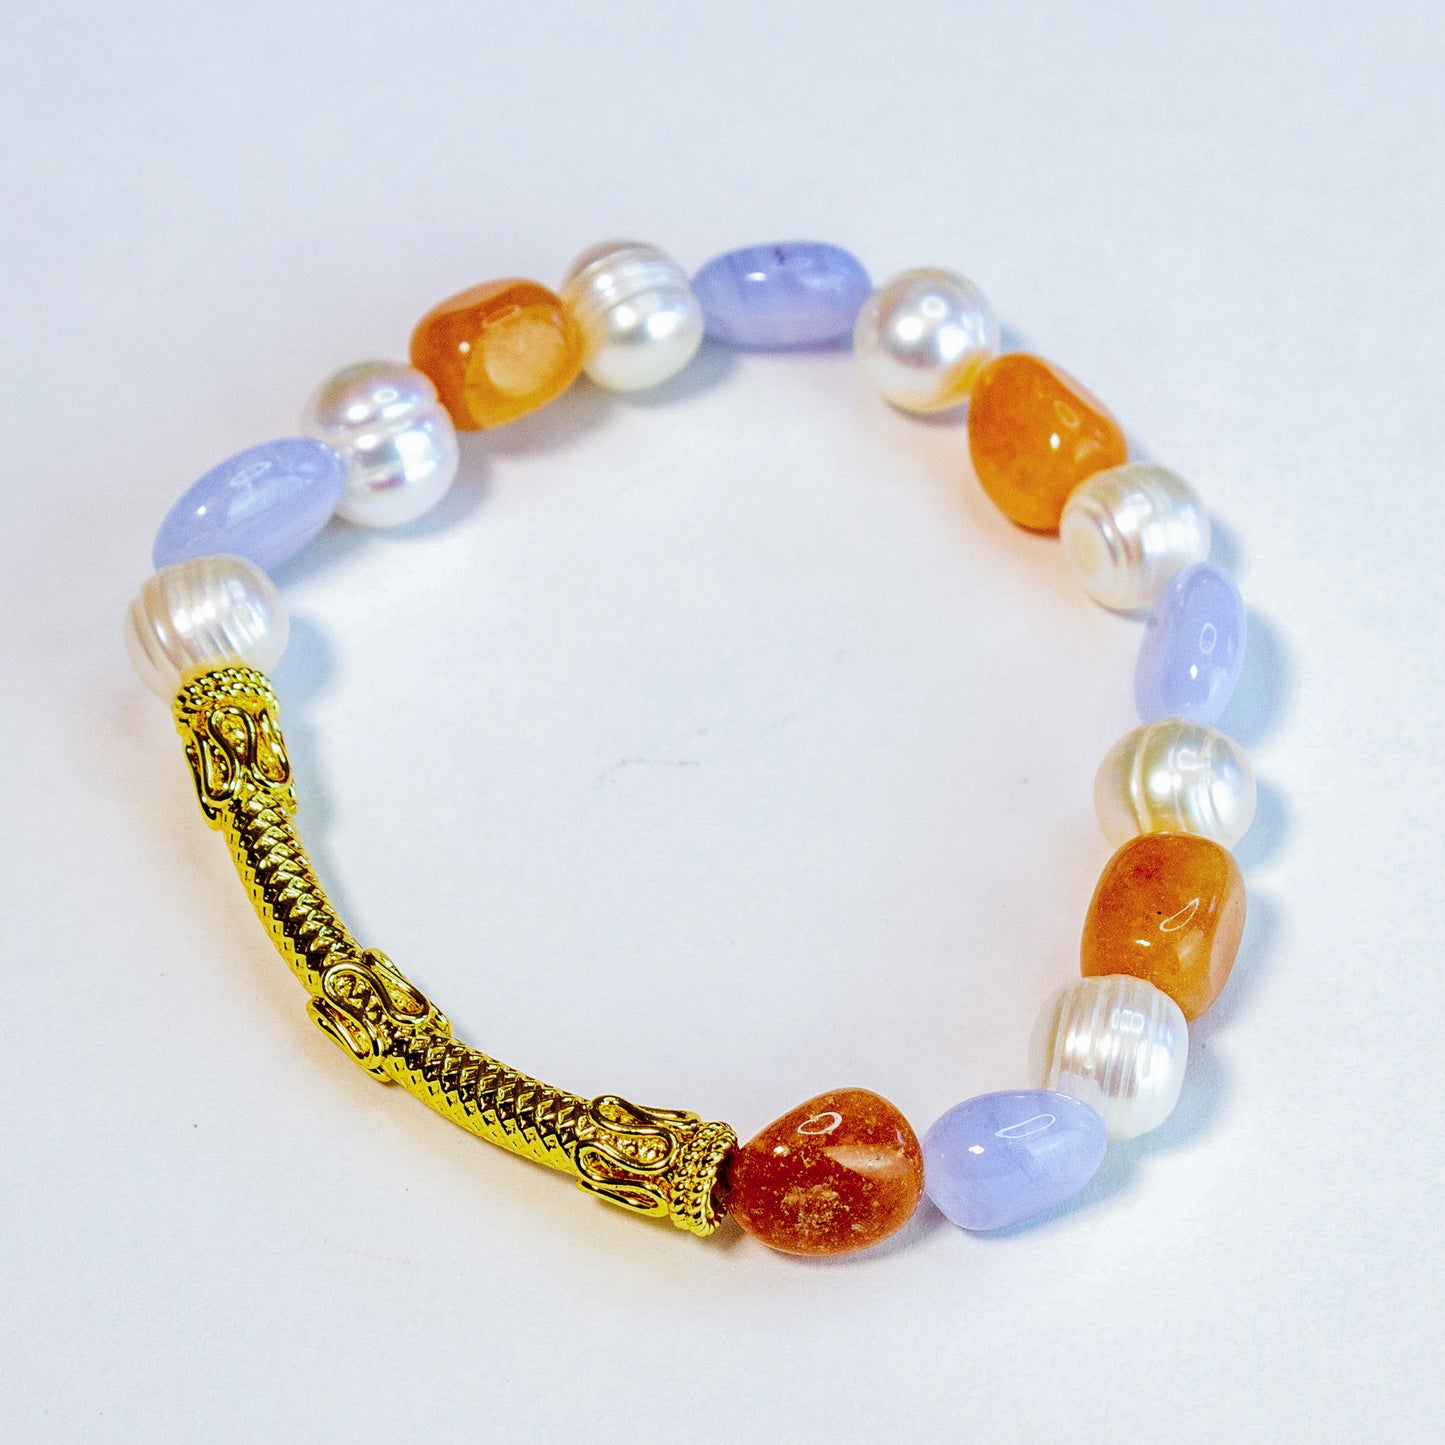 Blue Lace, Pearl and Carnelian Gemstone Beaded Bracelet with Bali Tube Accent Bead